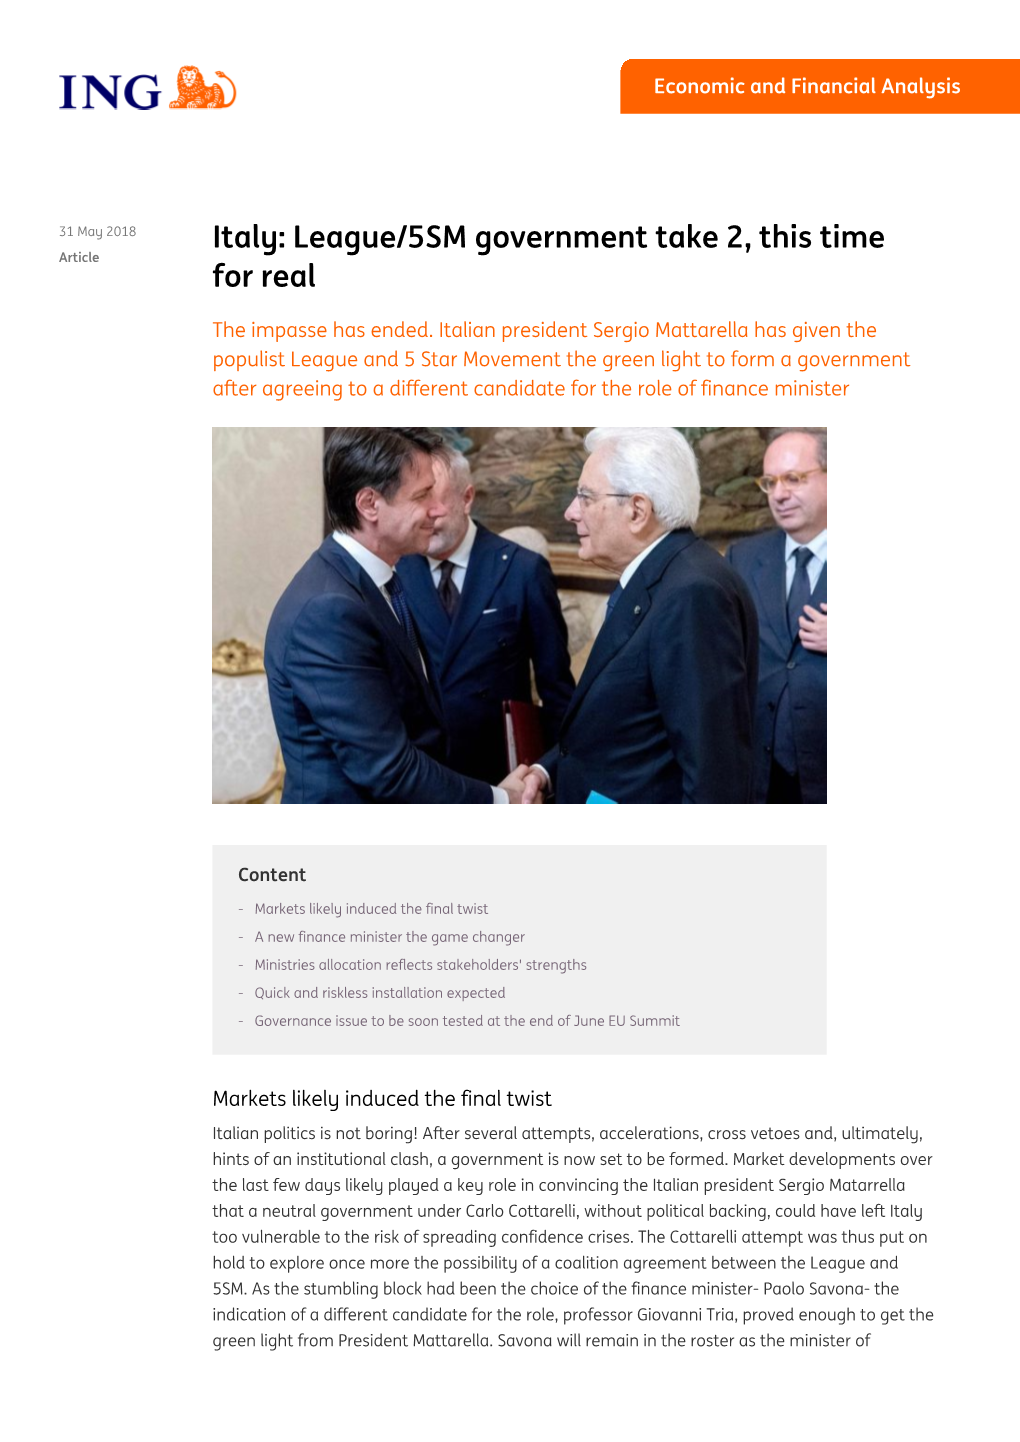 Italy: League/5SM Government Take 2, This Time For